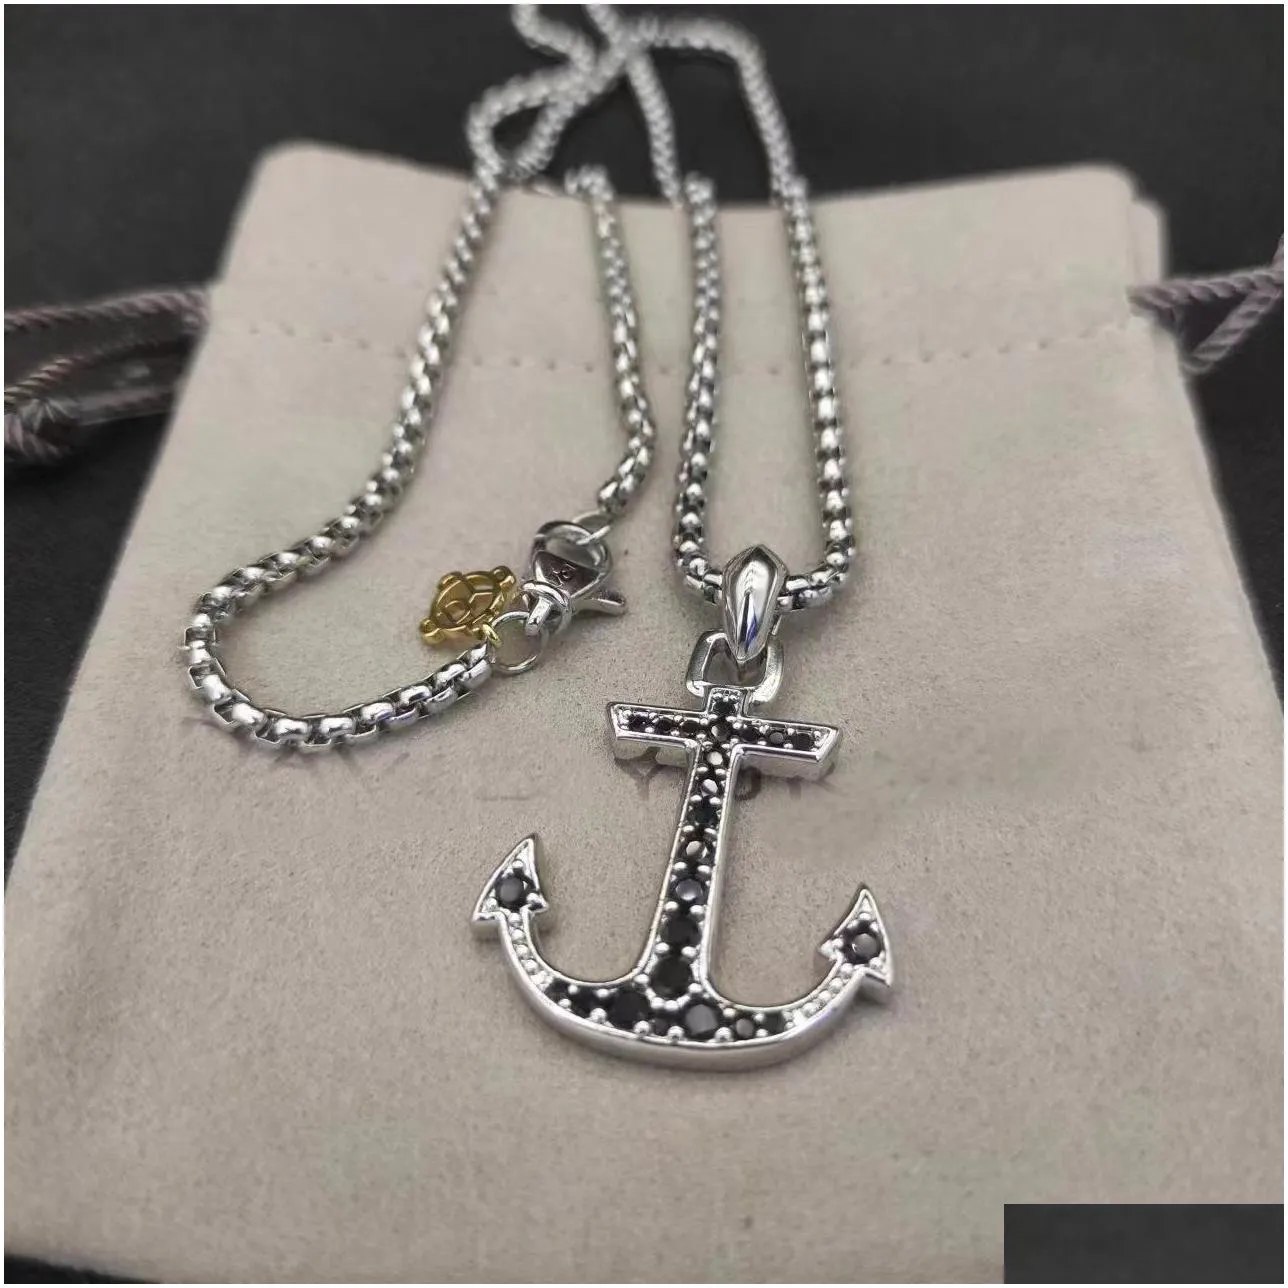 Pendant Necklaces Dy Fashion Necklace Designer High Quality Exquisite Premium Cross Suower Anchor Horn Elegant Lovers Wedding Gift D Dh196